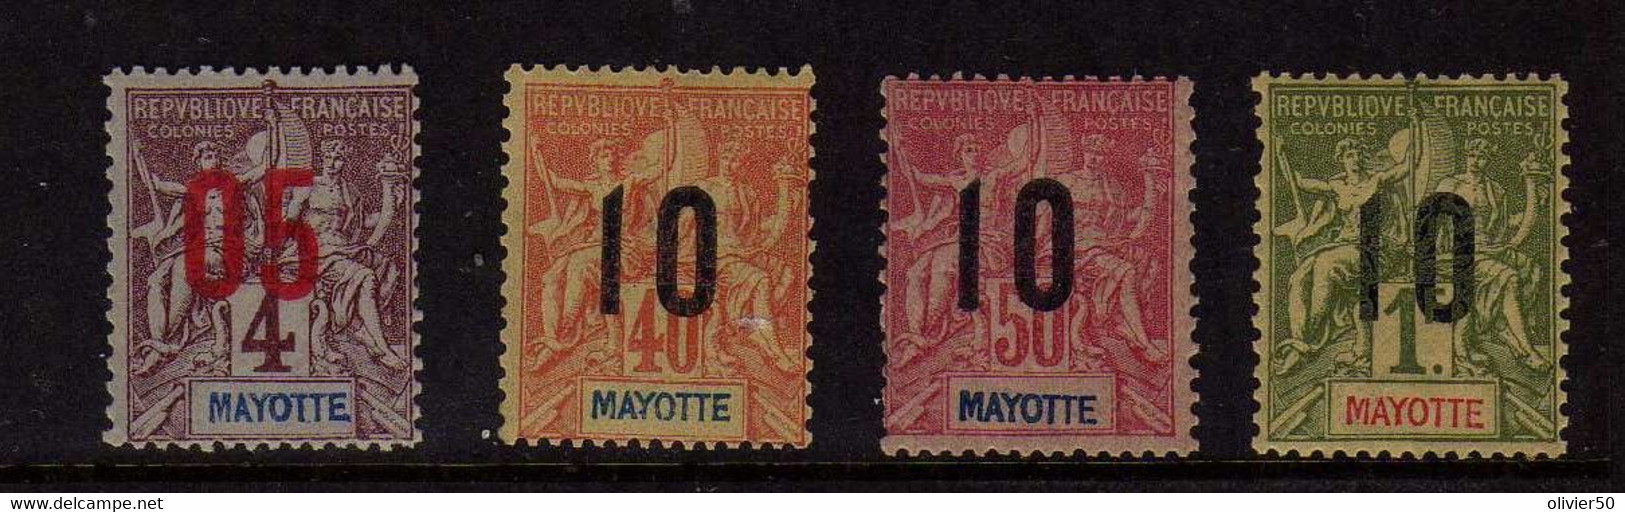 Mayotte (1912) - Type Groupe  Surcharge    Neuf* - MH - Neufs